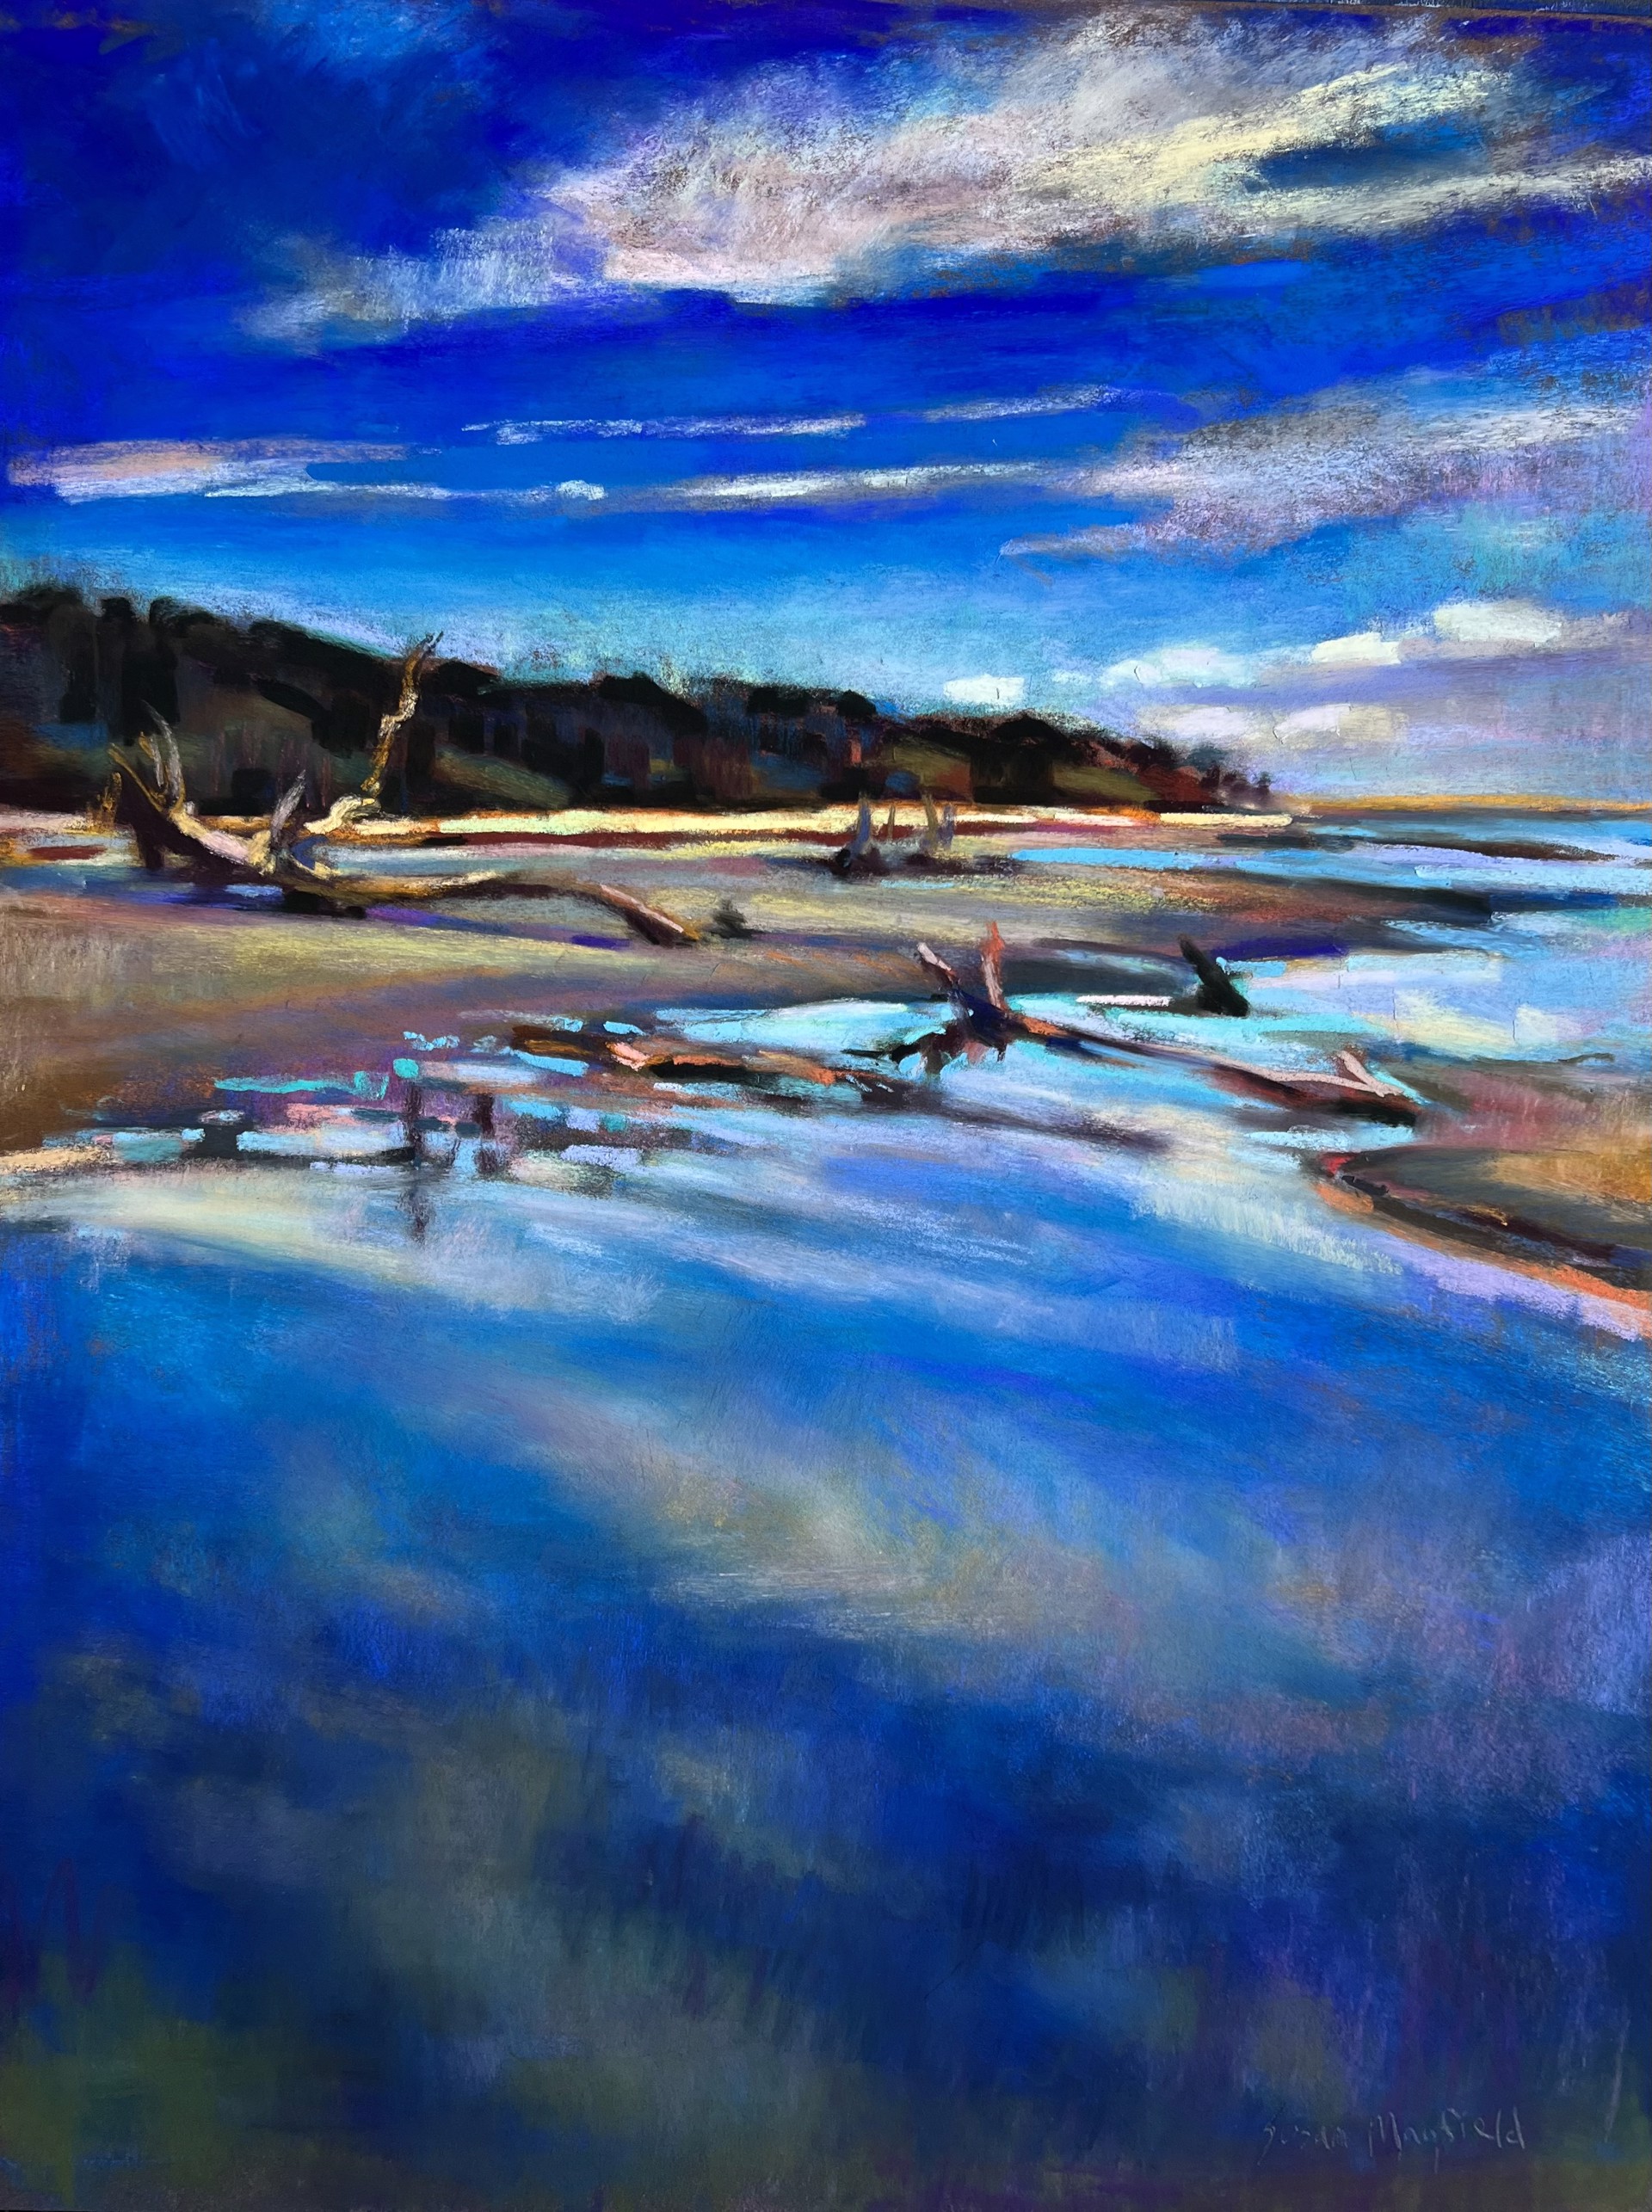 Reflections, Hunting Island by Susan Mayfield